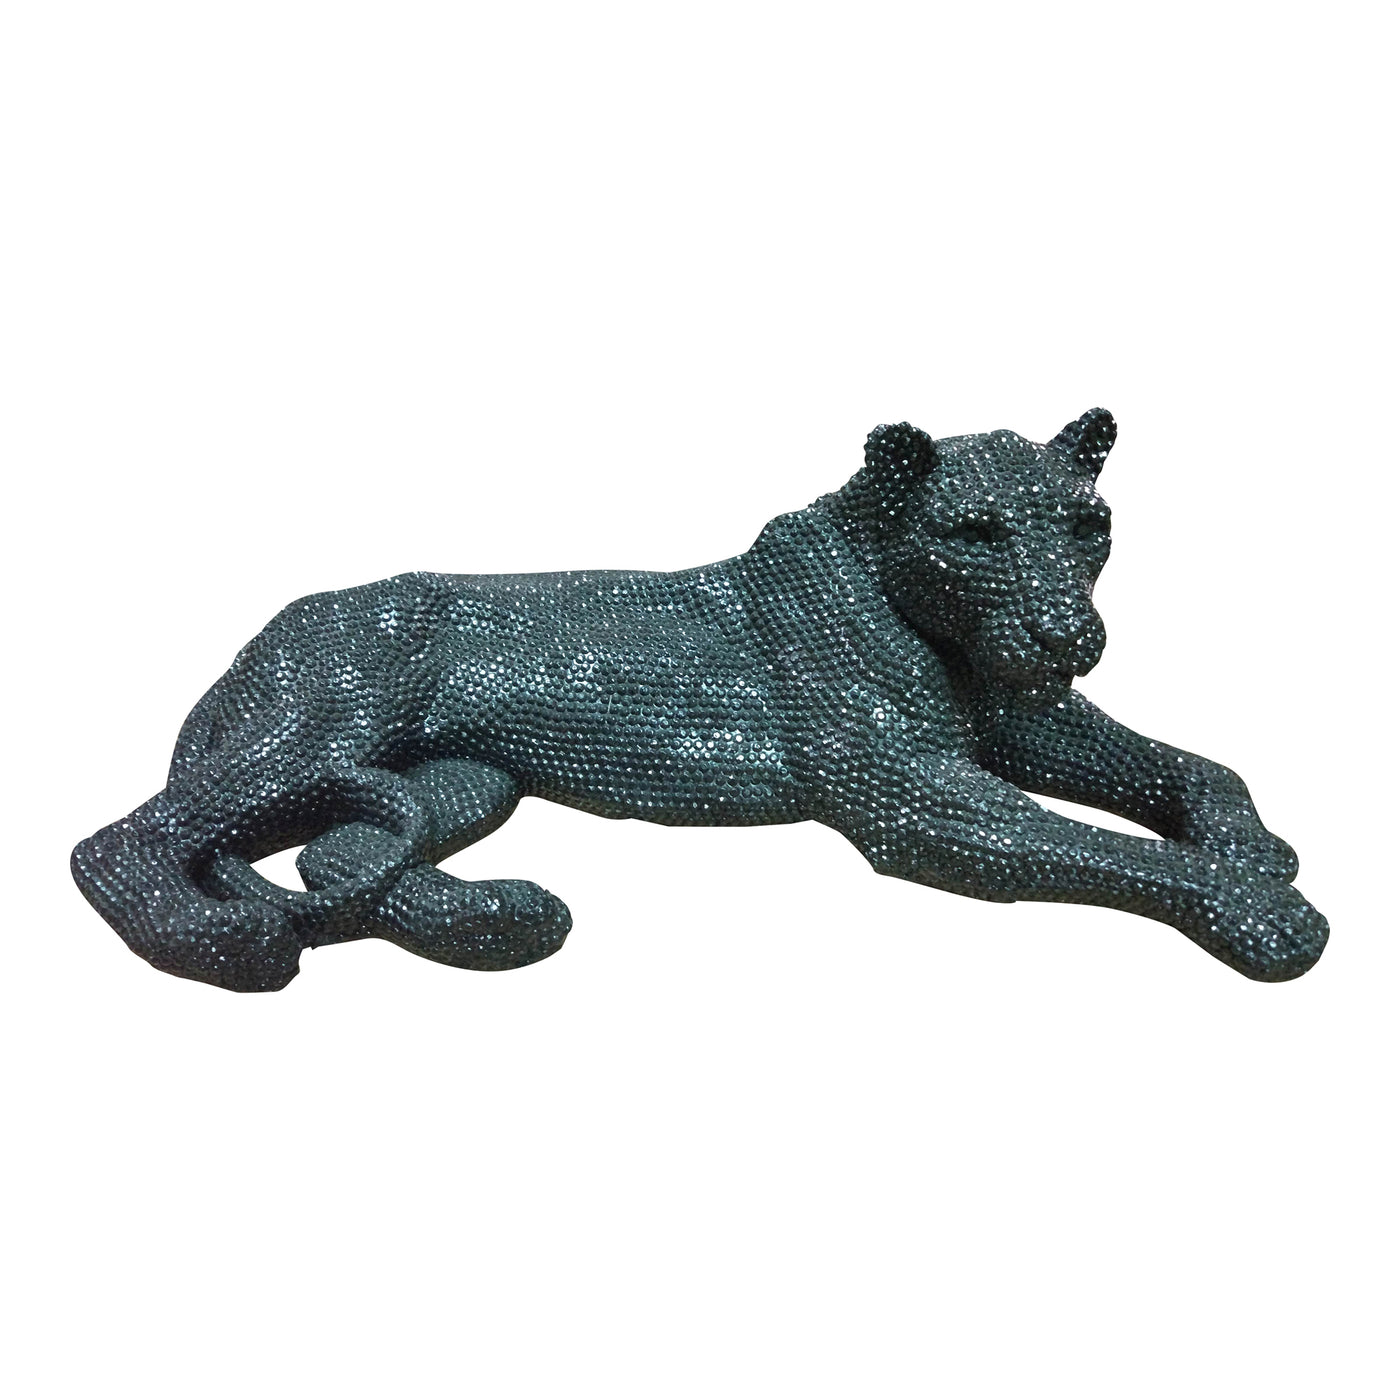 Majestic in nature, this Panther statue, or Jaguar if you prefer, is molded from polyresin making it lightweight and durab...